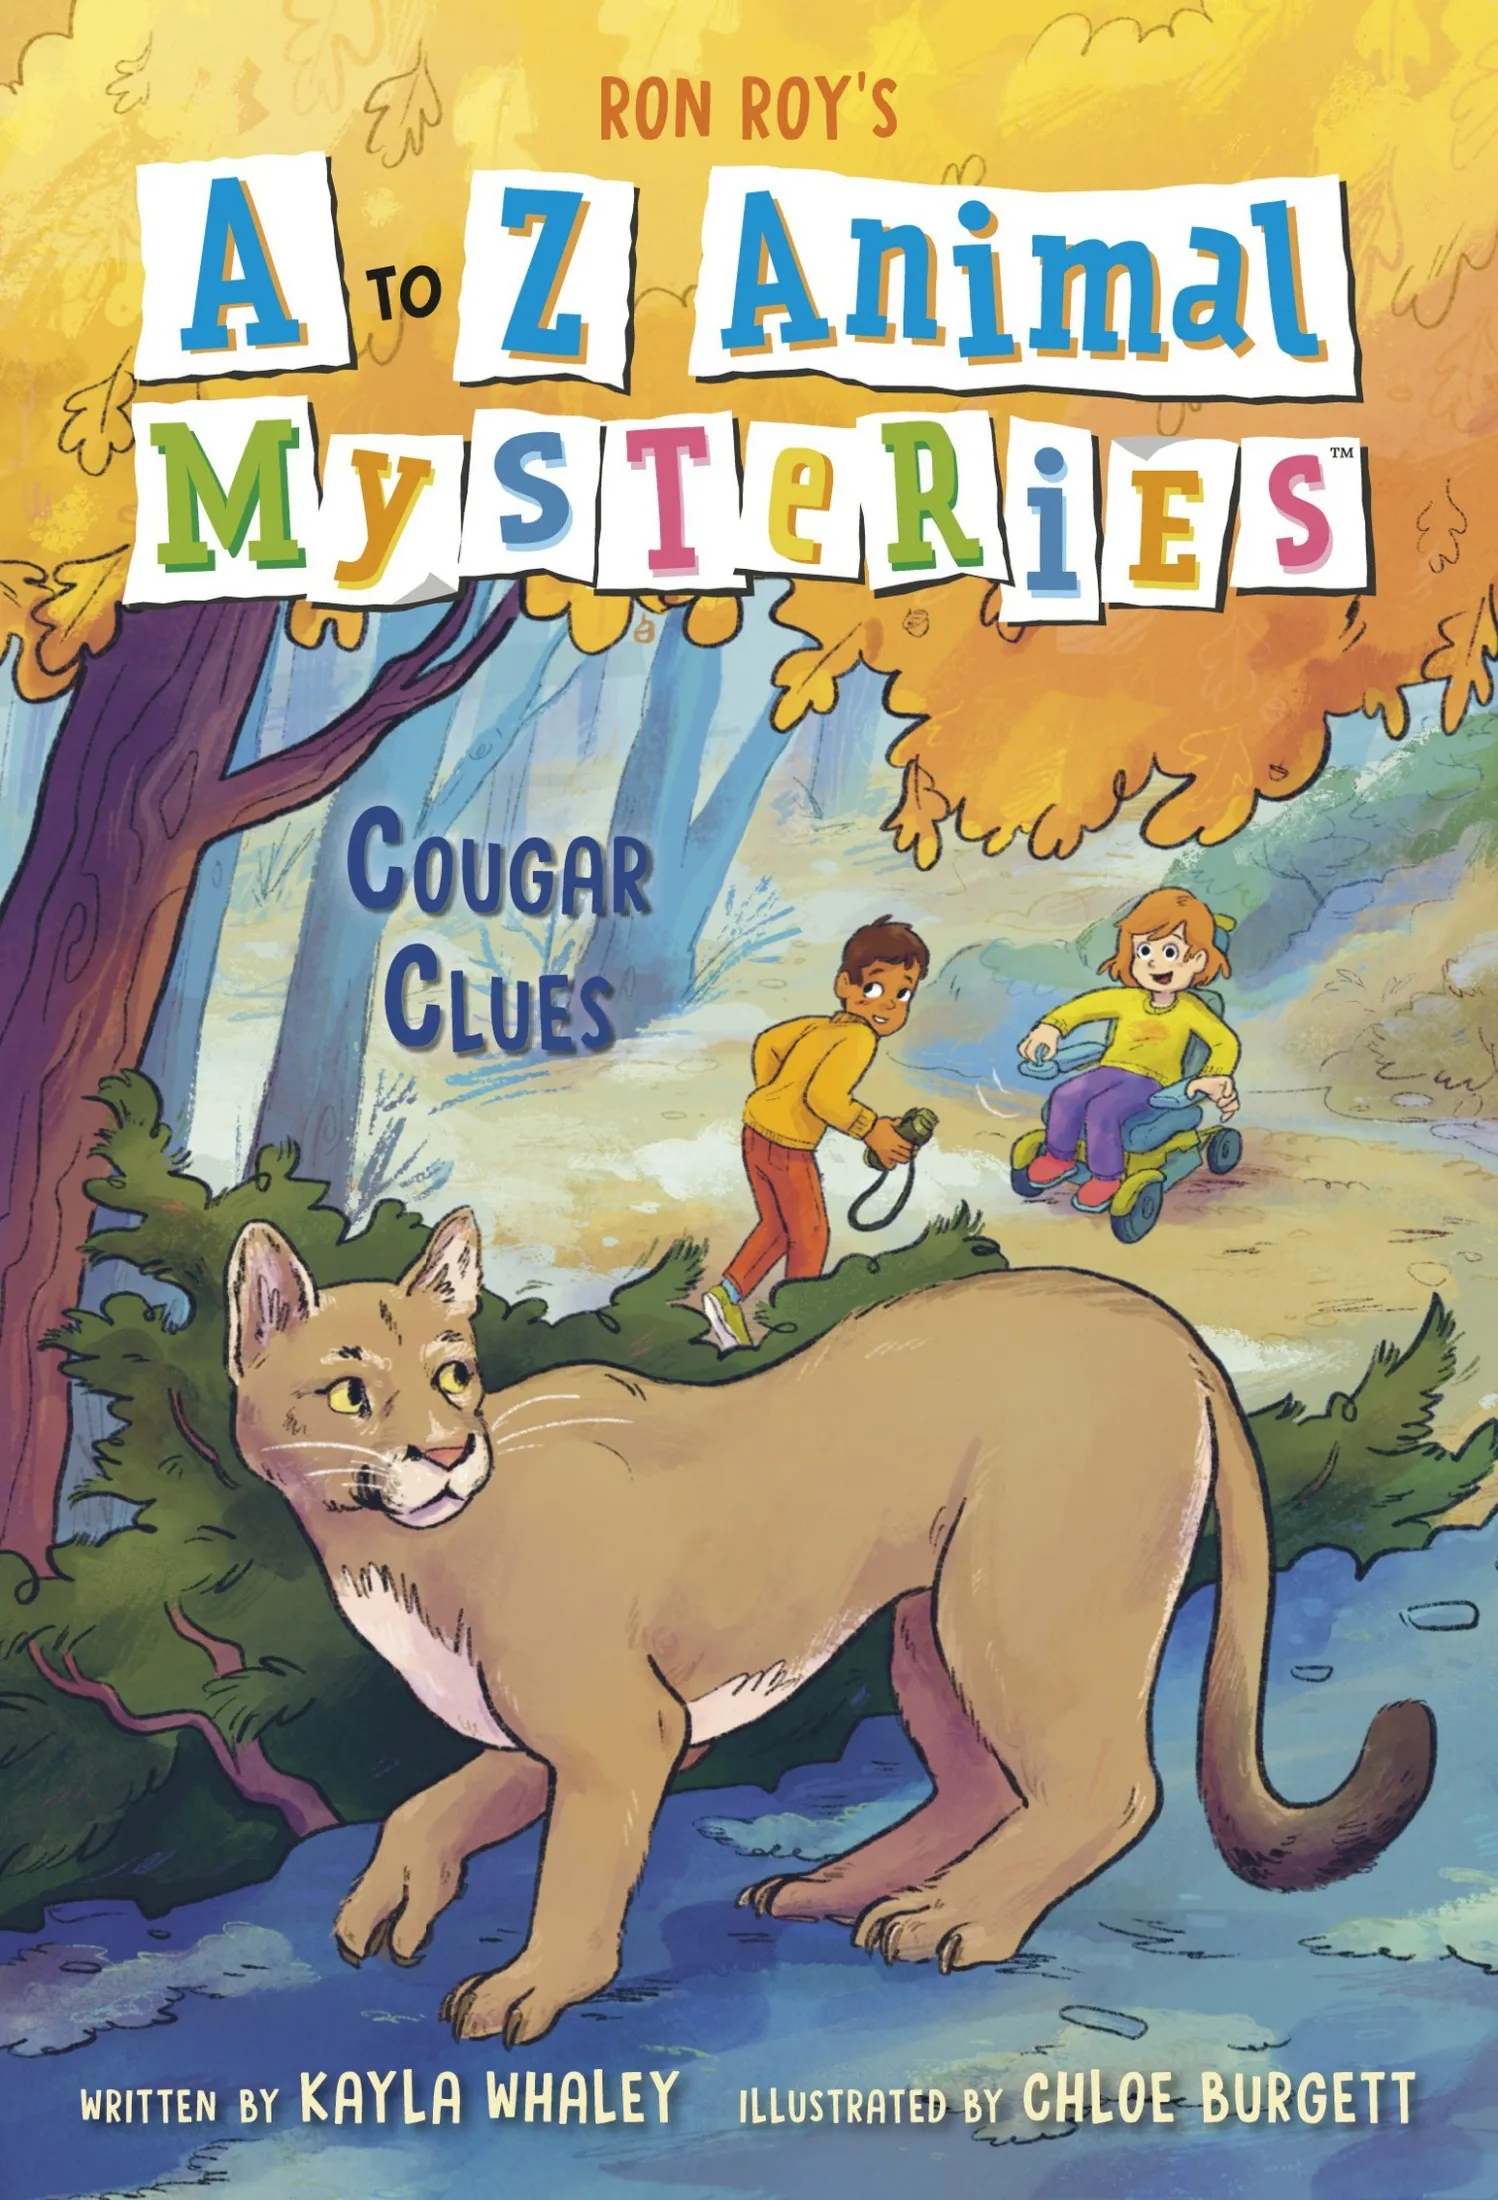 Cougar Clues (A to Z Animal Mysteries #3)